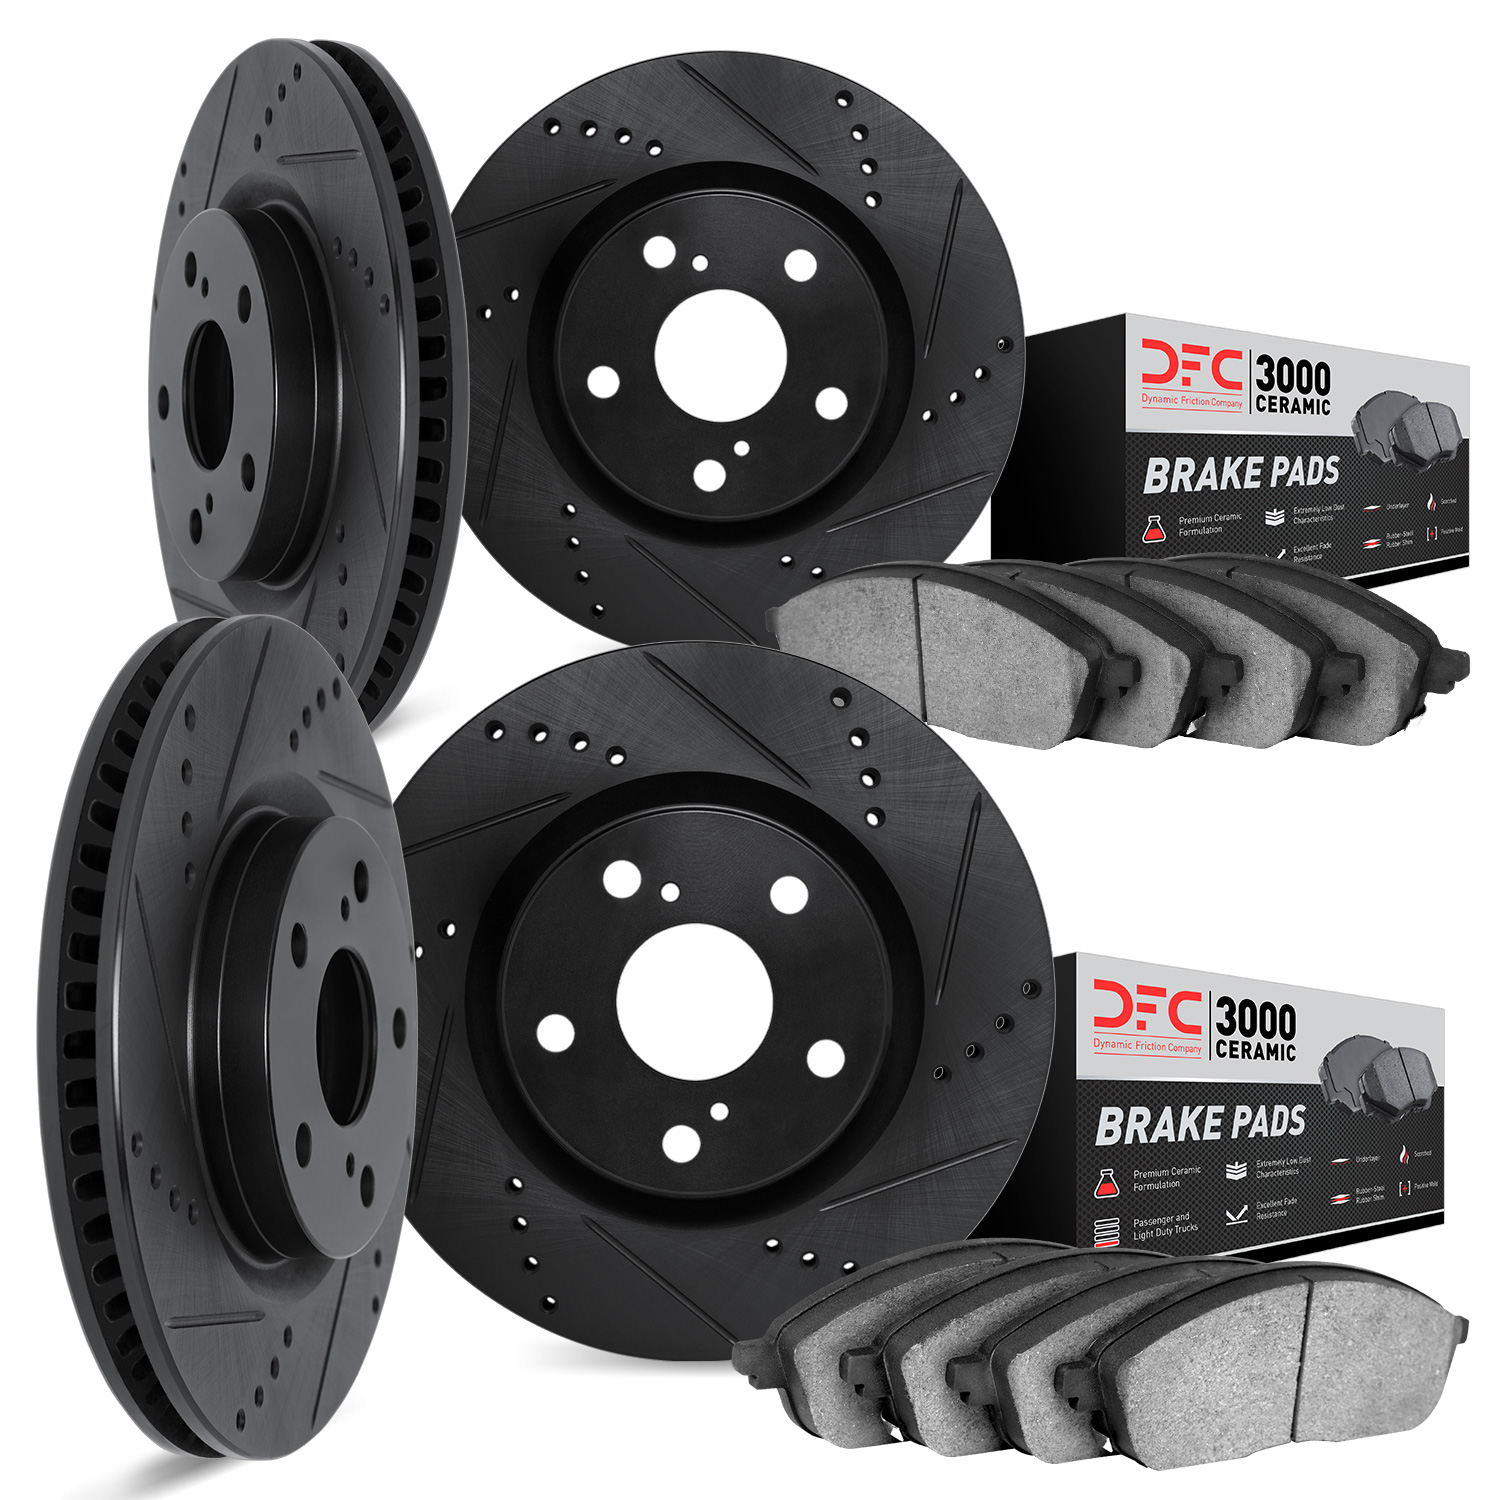 8304-63132 Drilled/Slotted Brake Rotors with 3000-Series Ceramic Brake Pads Kit [Black], 2013-2019 Mercedes-Benz, Position: Fron